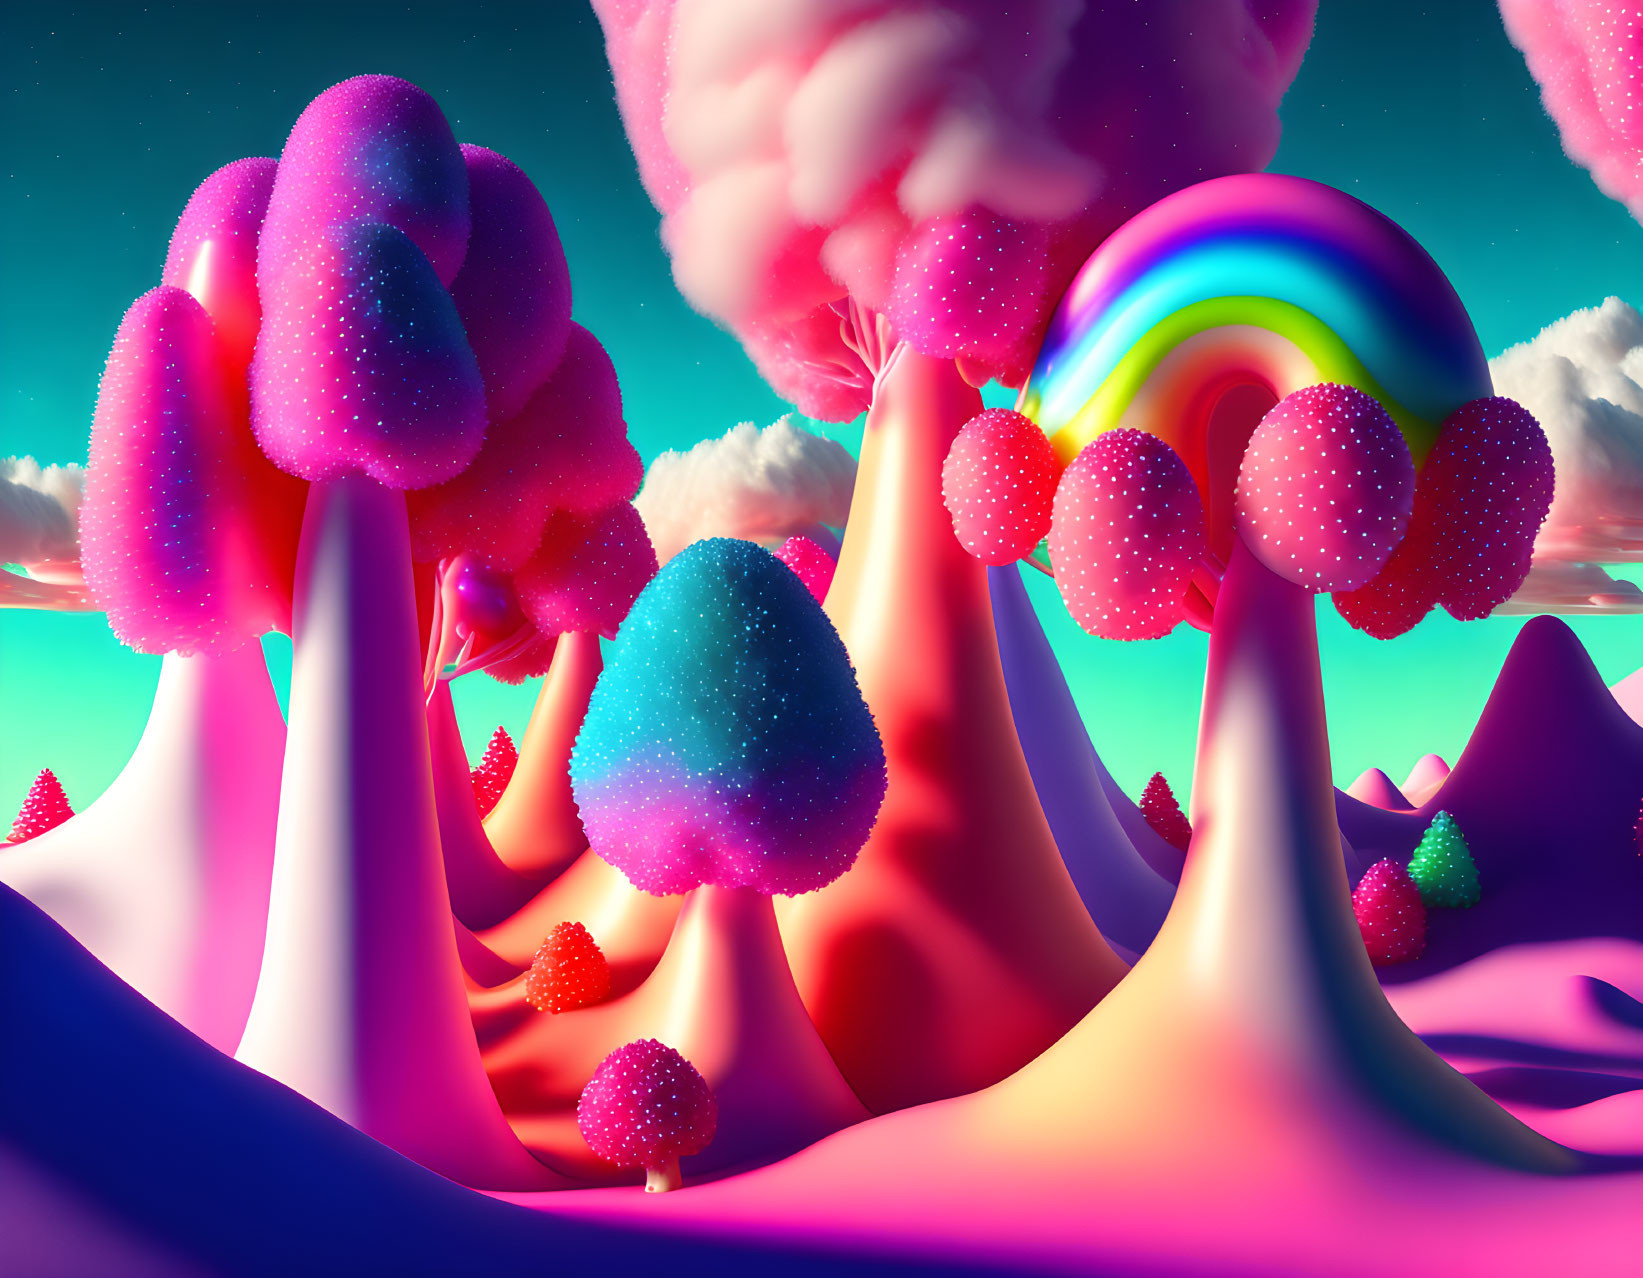 Colorful surreal landscape with candy-like trees and rainbow skies